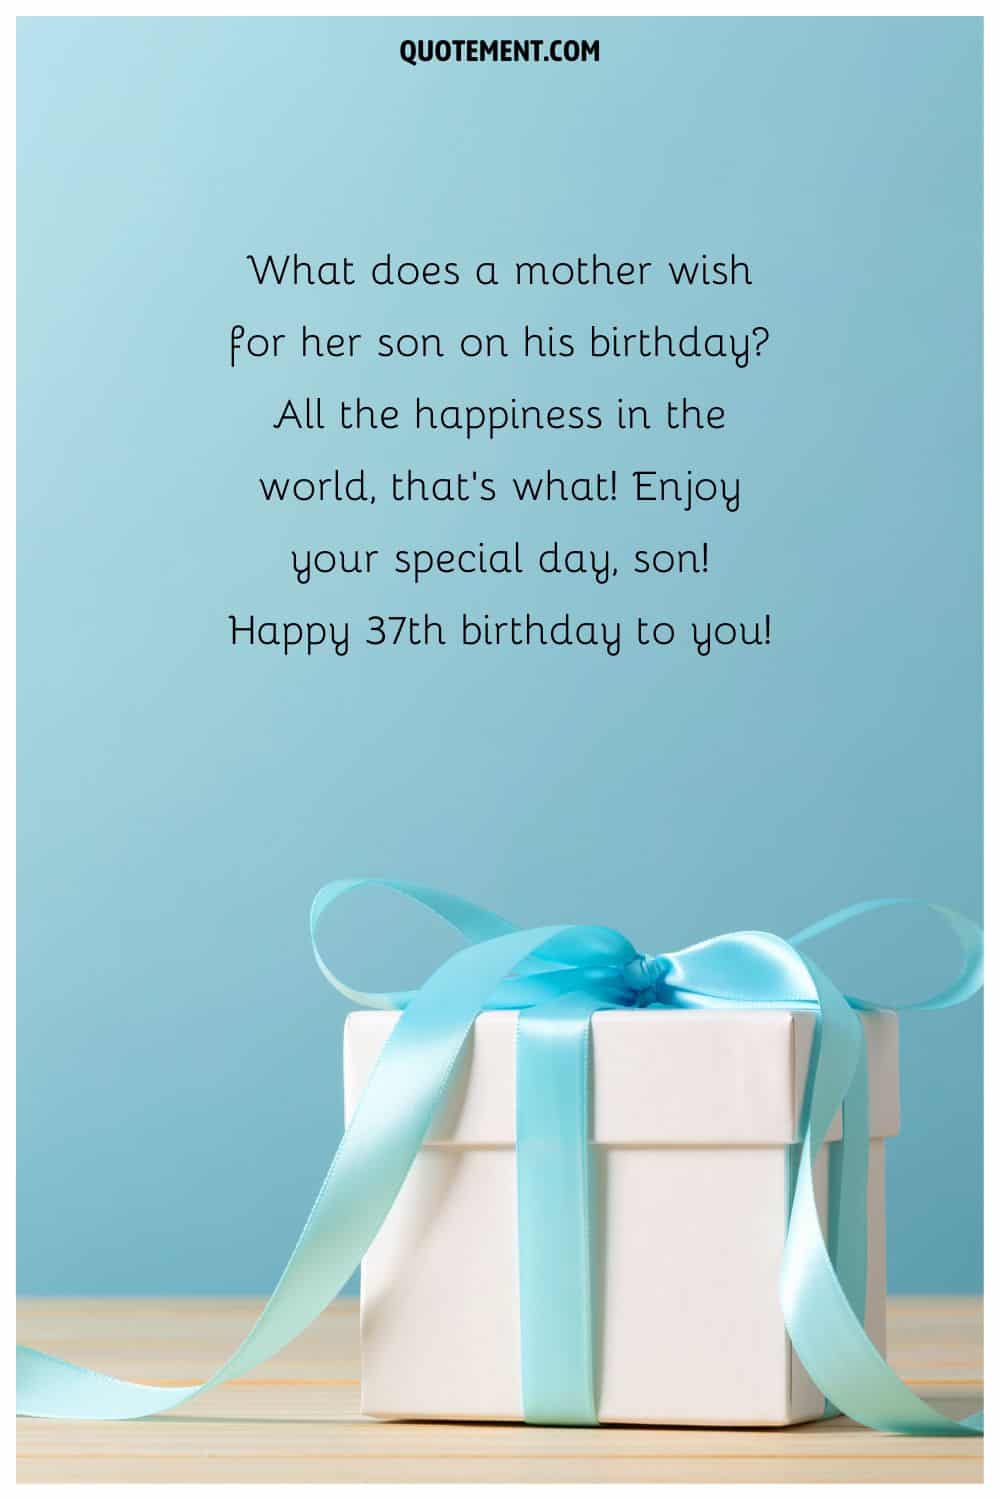 What does a mother wish for her son on his birthday All the happiness in the world, that's what! Enjoy your special day, son! Happy 37th birthday to you!